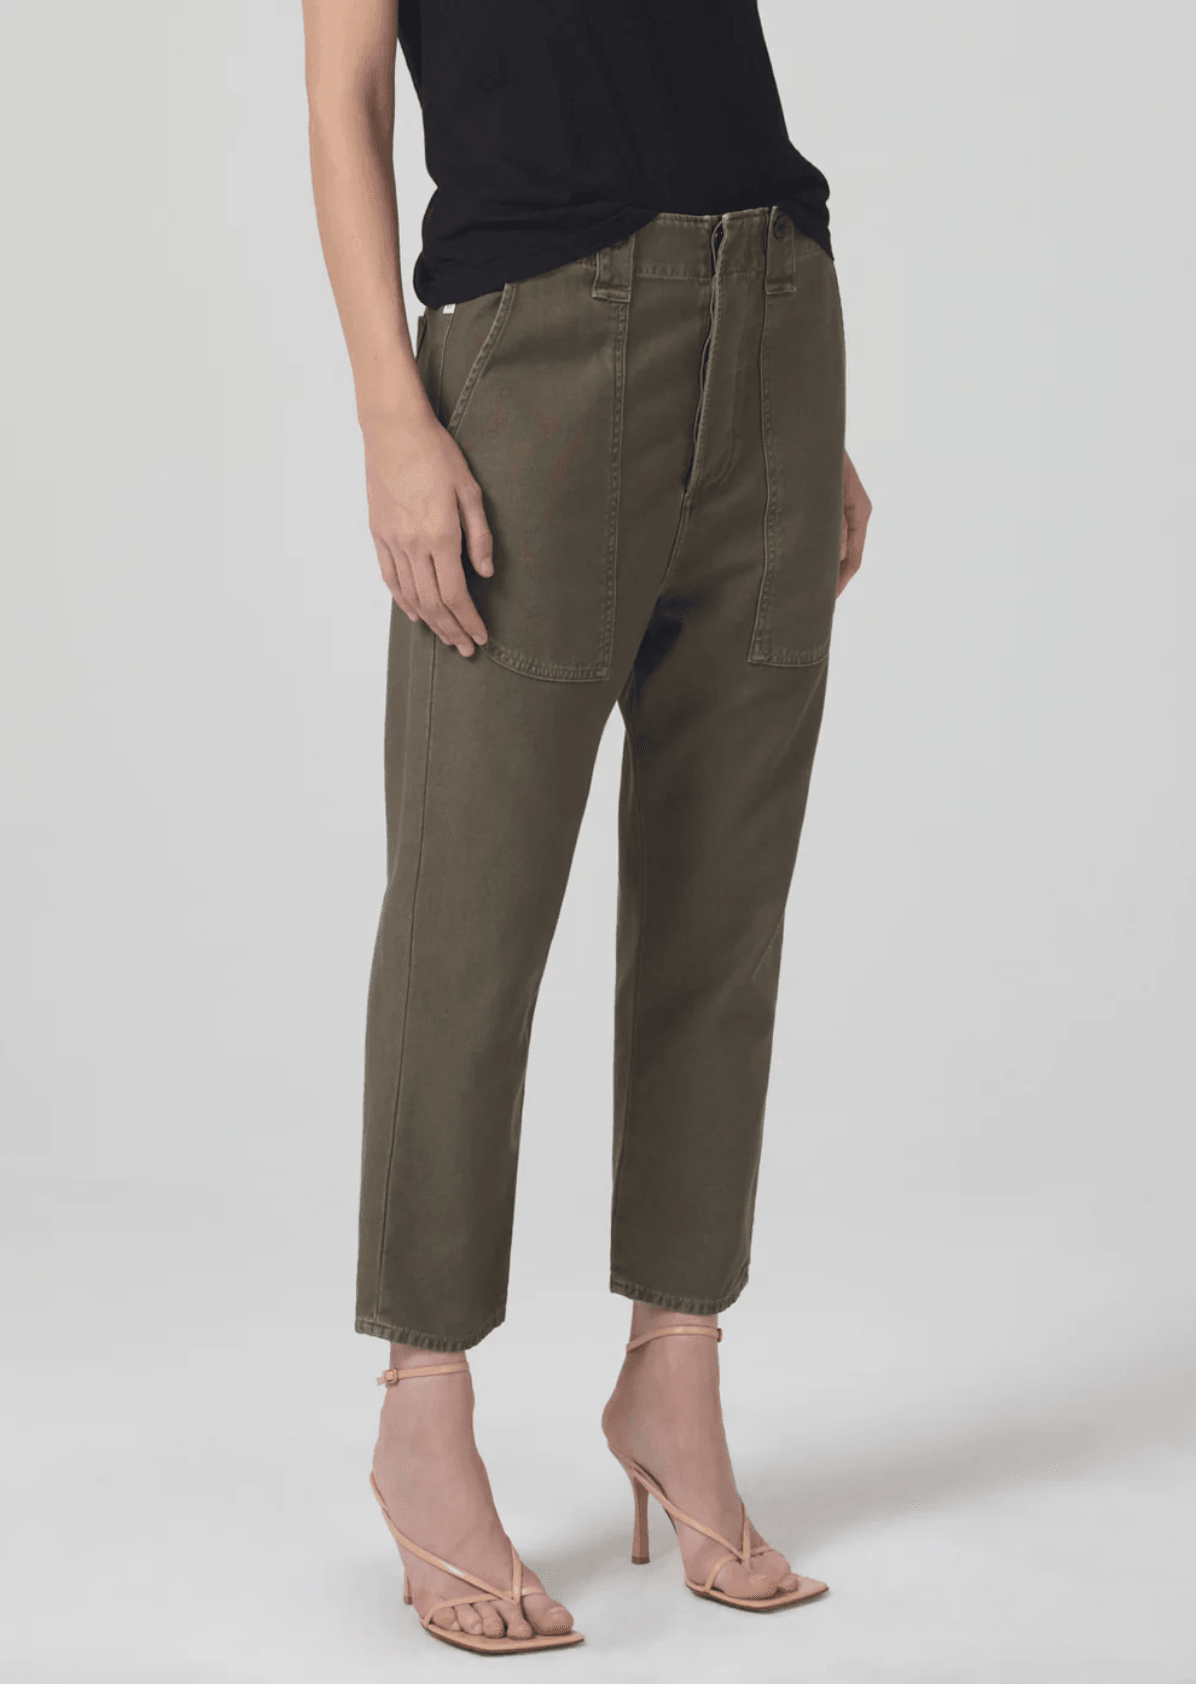 Citizens of Humanity - Pony Boy Khaki Utility Trousers - 32 The Guild 